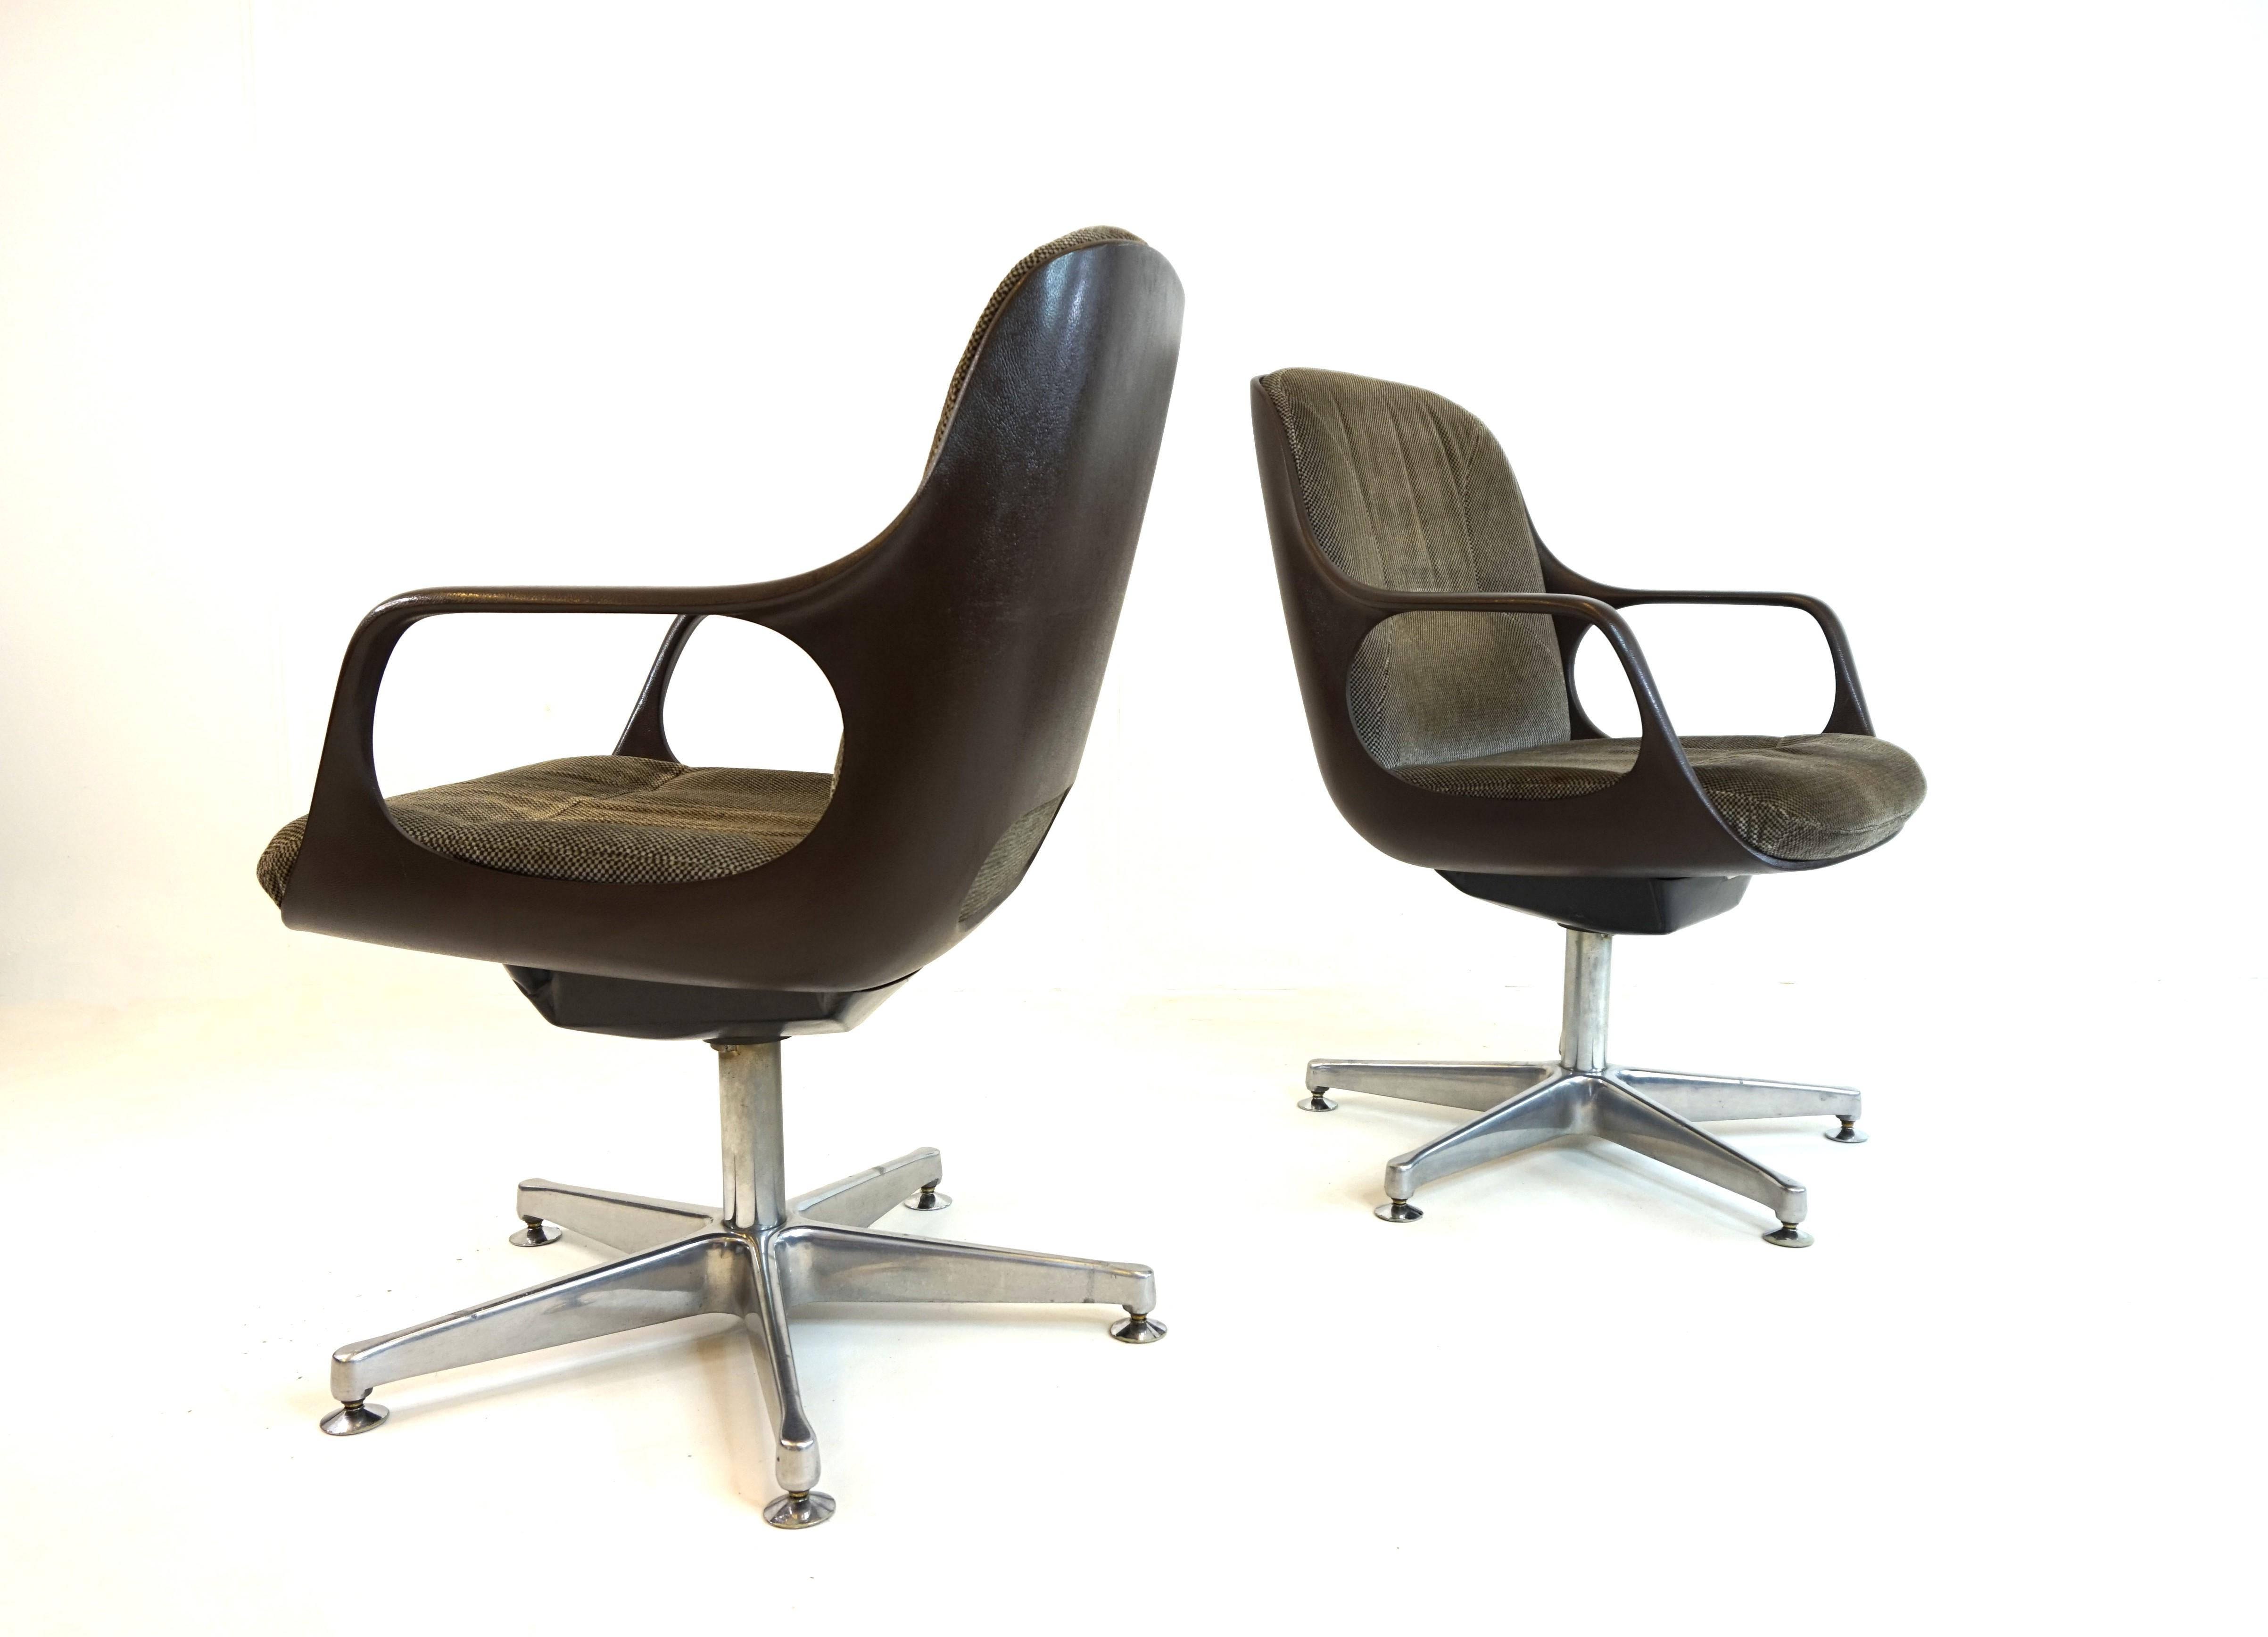 Well-preserved set of 2 office/dining room chairs from the well-known manufacturer Chromcraft. The brown velor fabric of the chairs, as well as the brown plastic shells, are in good condition with slight signs of wear. The solid chrome-plated metal